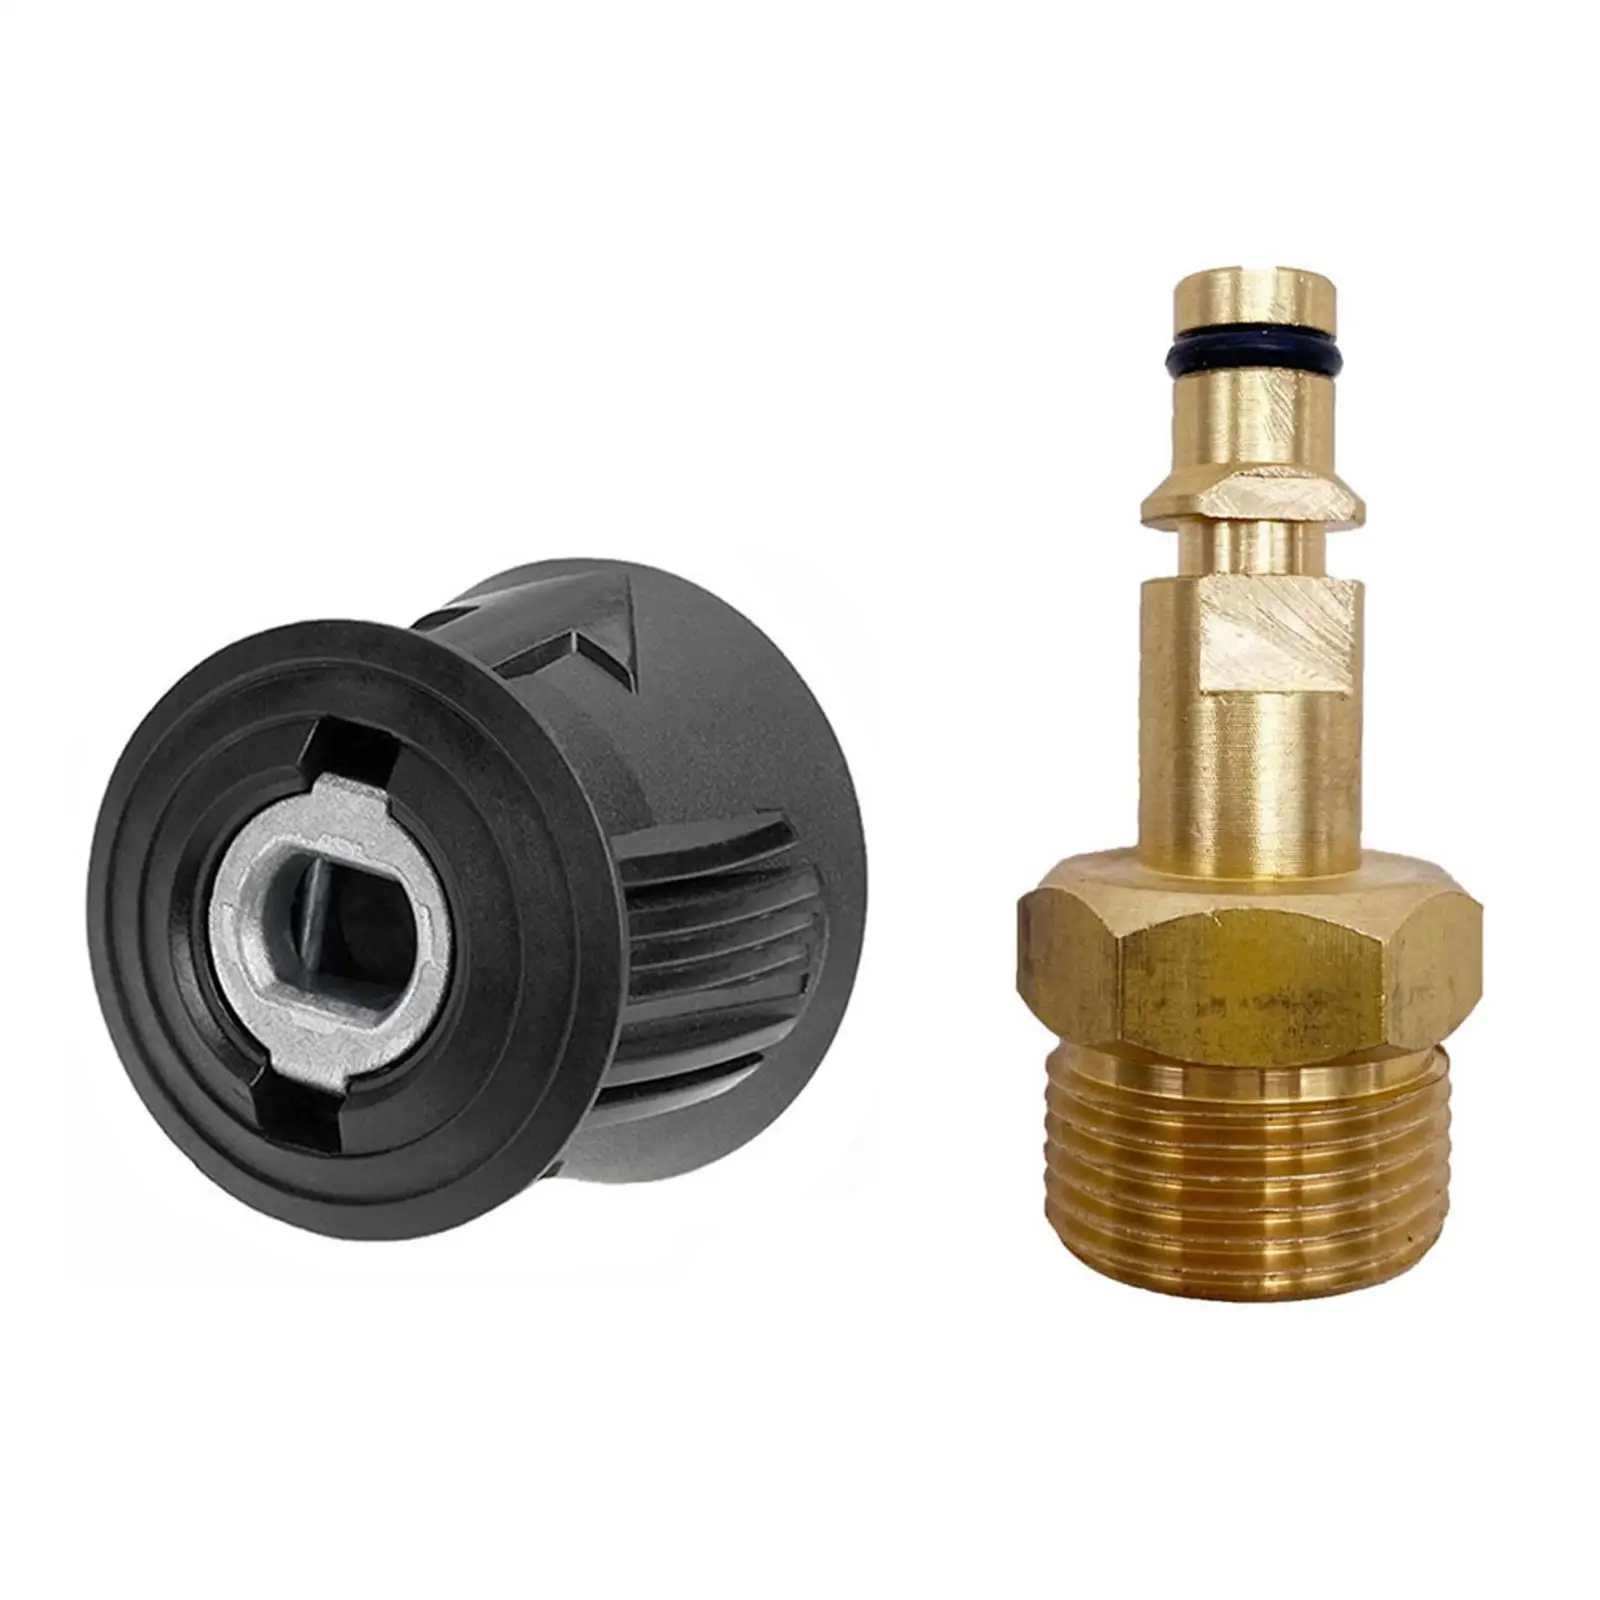 2 Pressure Cleaner Hose Adapter Quick Connector Copper Pressure Washer Adapter for K Replacement Kits Home Garden